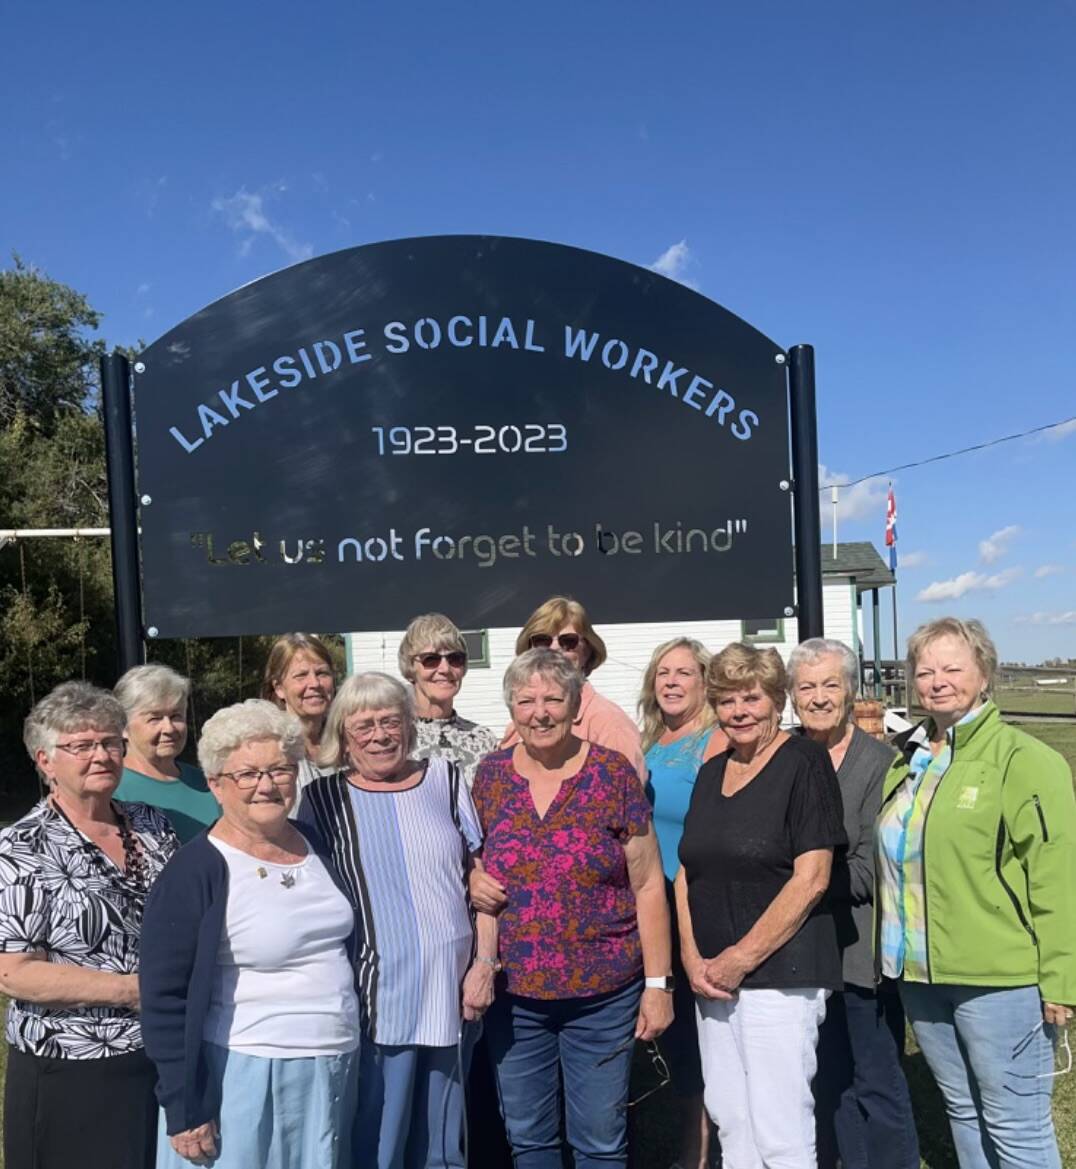 Lakeside Social Workers reflect on a legacy of friendship and